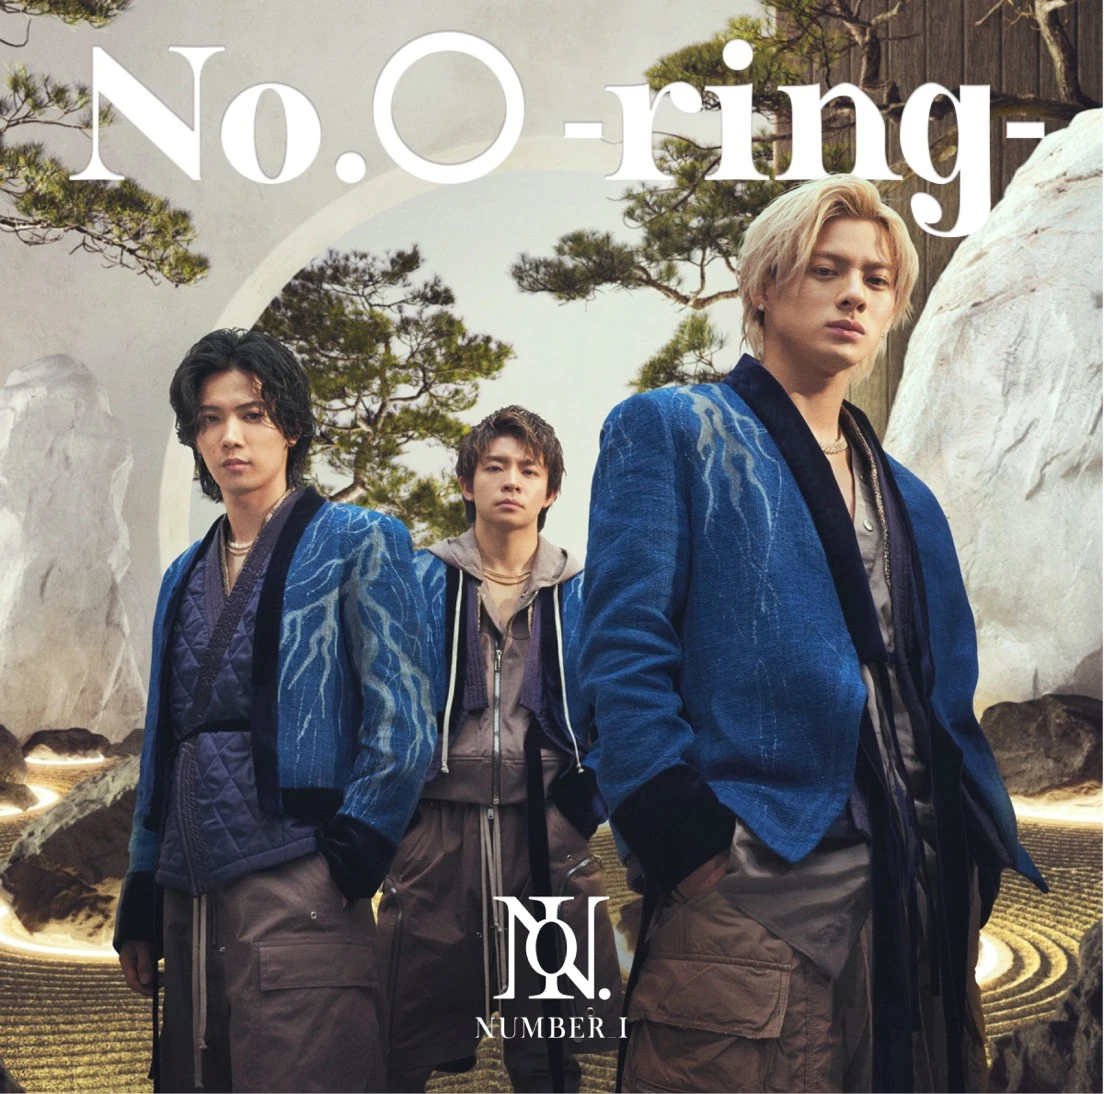 PUNPEEさんの提供曲が収録された『No.O -ring-』通常盤ジャケット写真／画像は<a href="https://tobe-official.jp/artists/number_i/discography/54" target="_blank">Number_i公式サイト</a>より